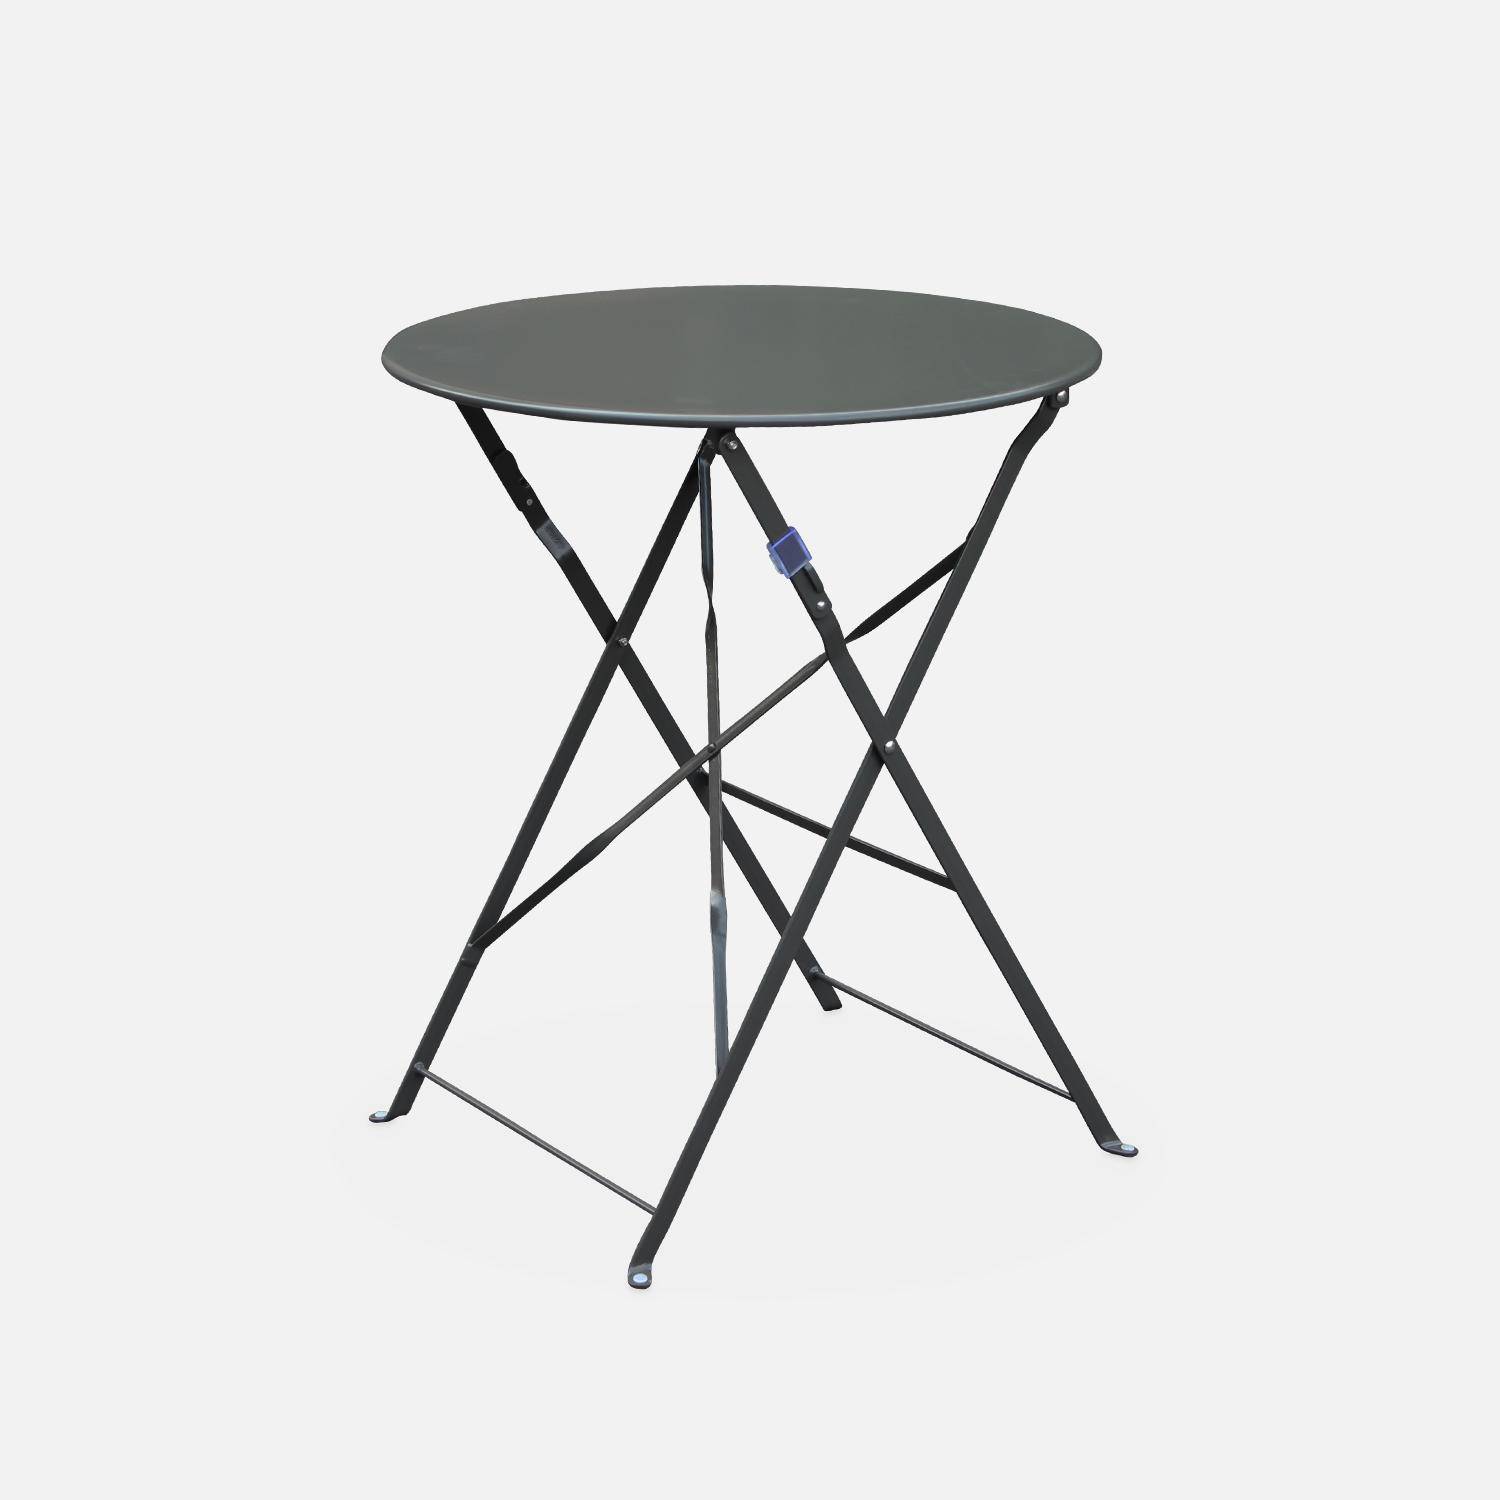 Foldable bistro garden table - Round Emilia anthracite- Round table Ø60cm, thermo-lacquered steel Photo4